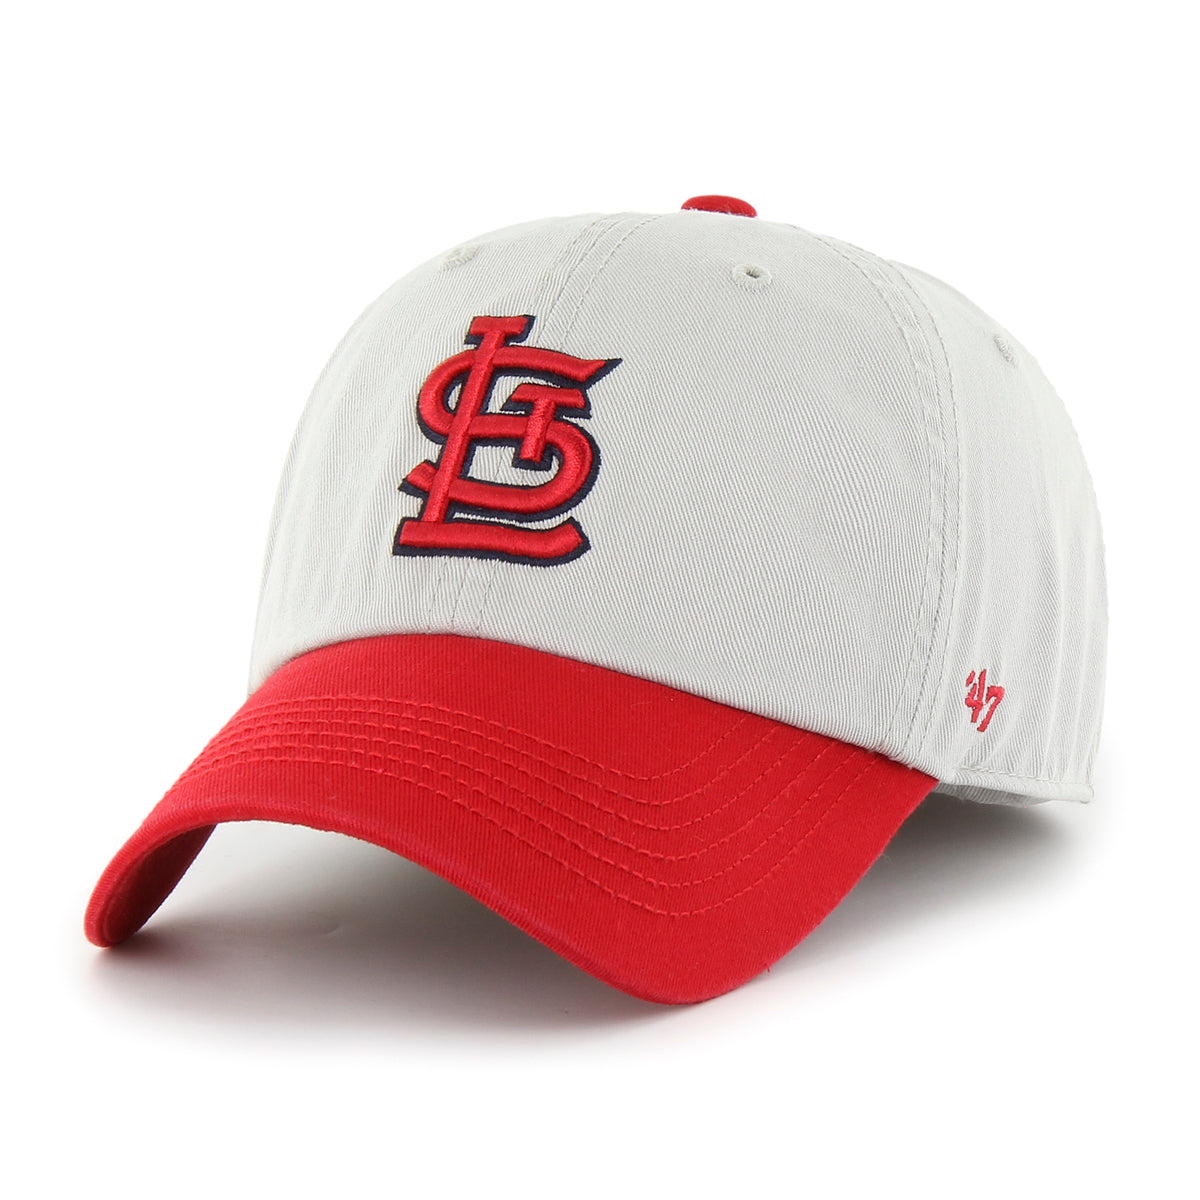 ST. LOUIS CARDINALS COOPERSTOWN WORLD SERIES SURE SHOT CLASSIC TWO TONE '47 FRANCHISE